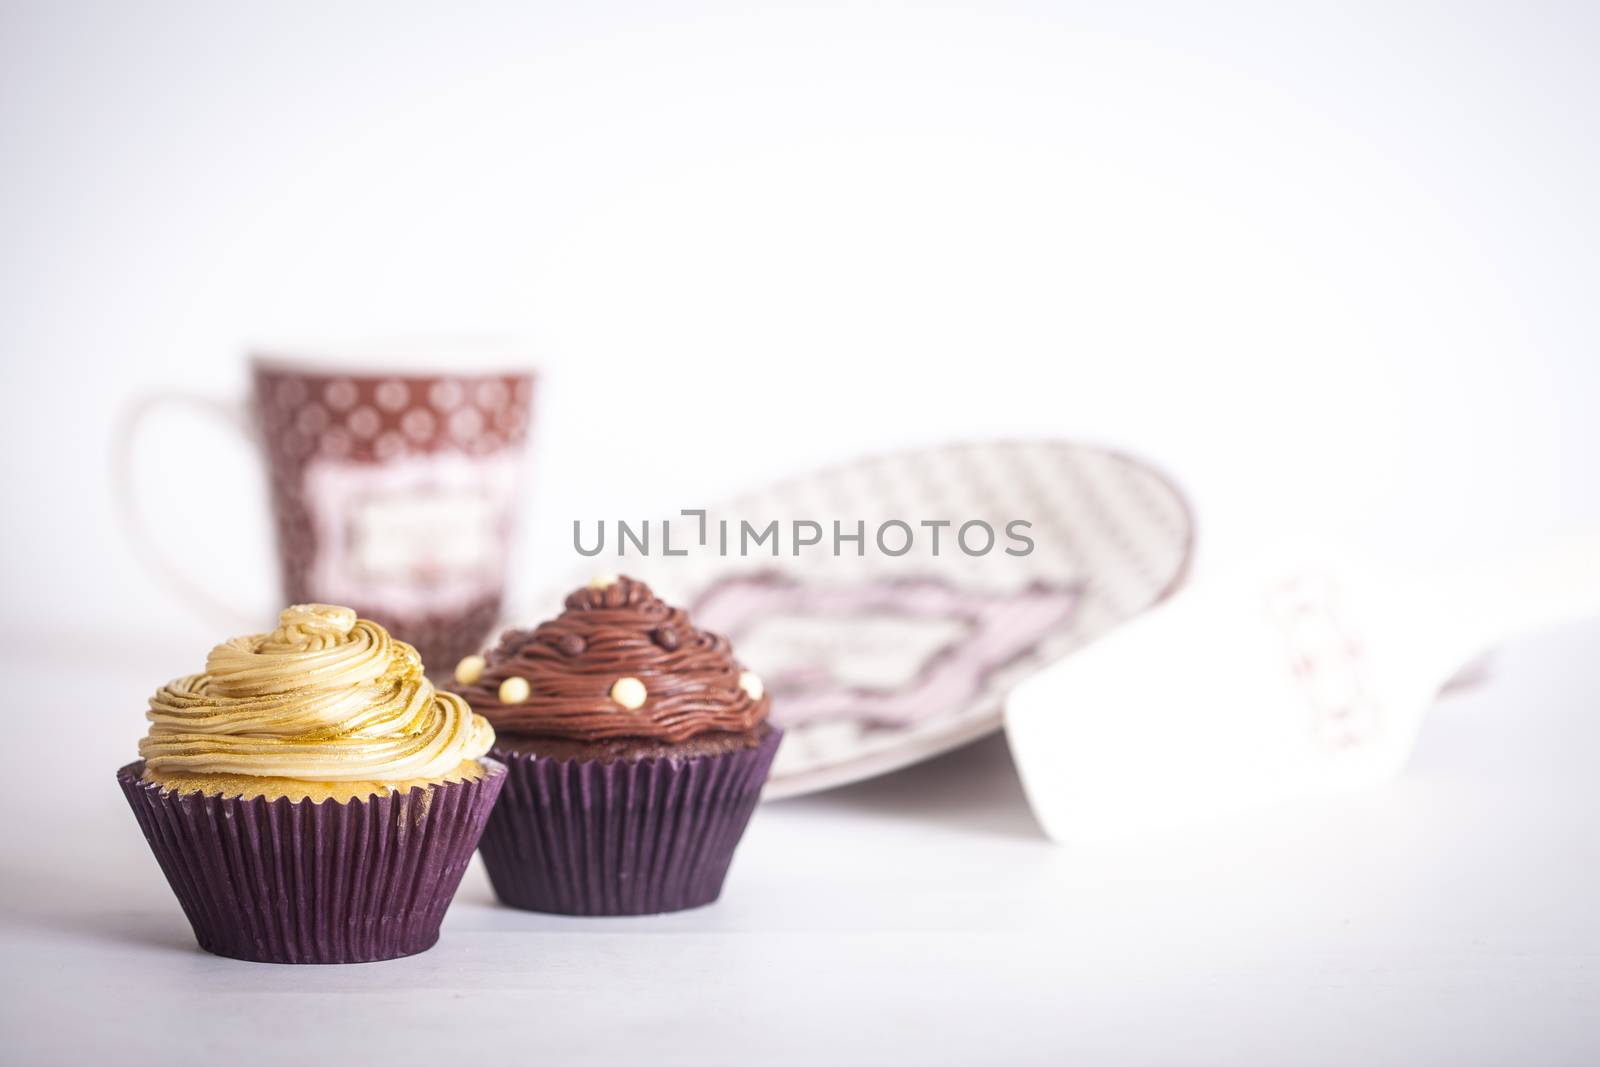 Cupcakes in front of plates and a mug, on a white background.